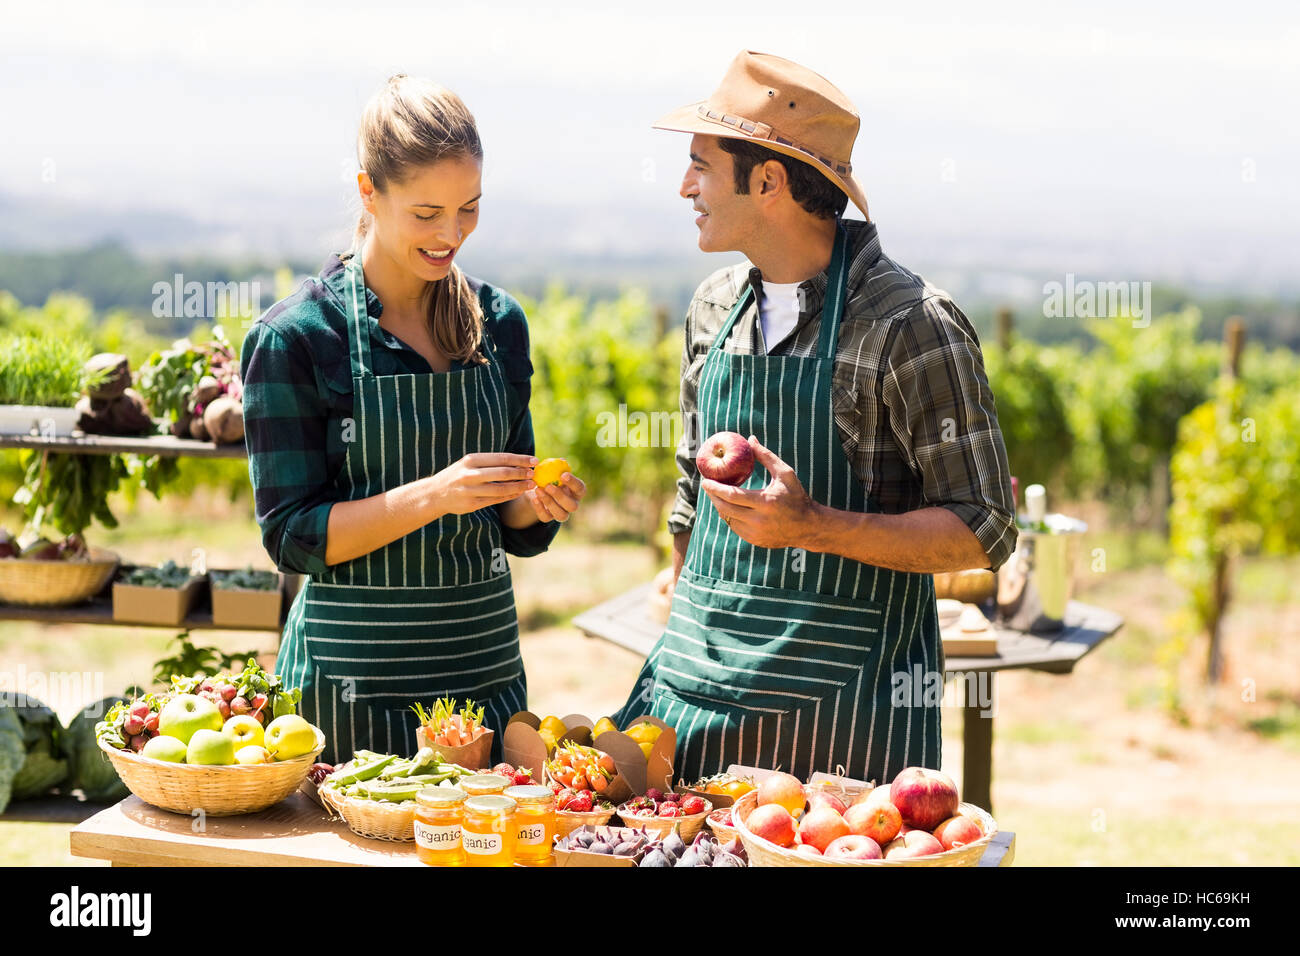 Farmer couple discussing with each other Stock Photo